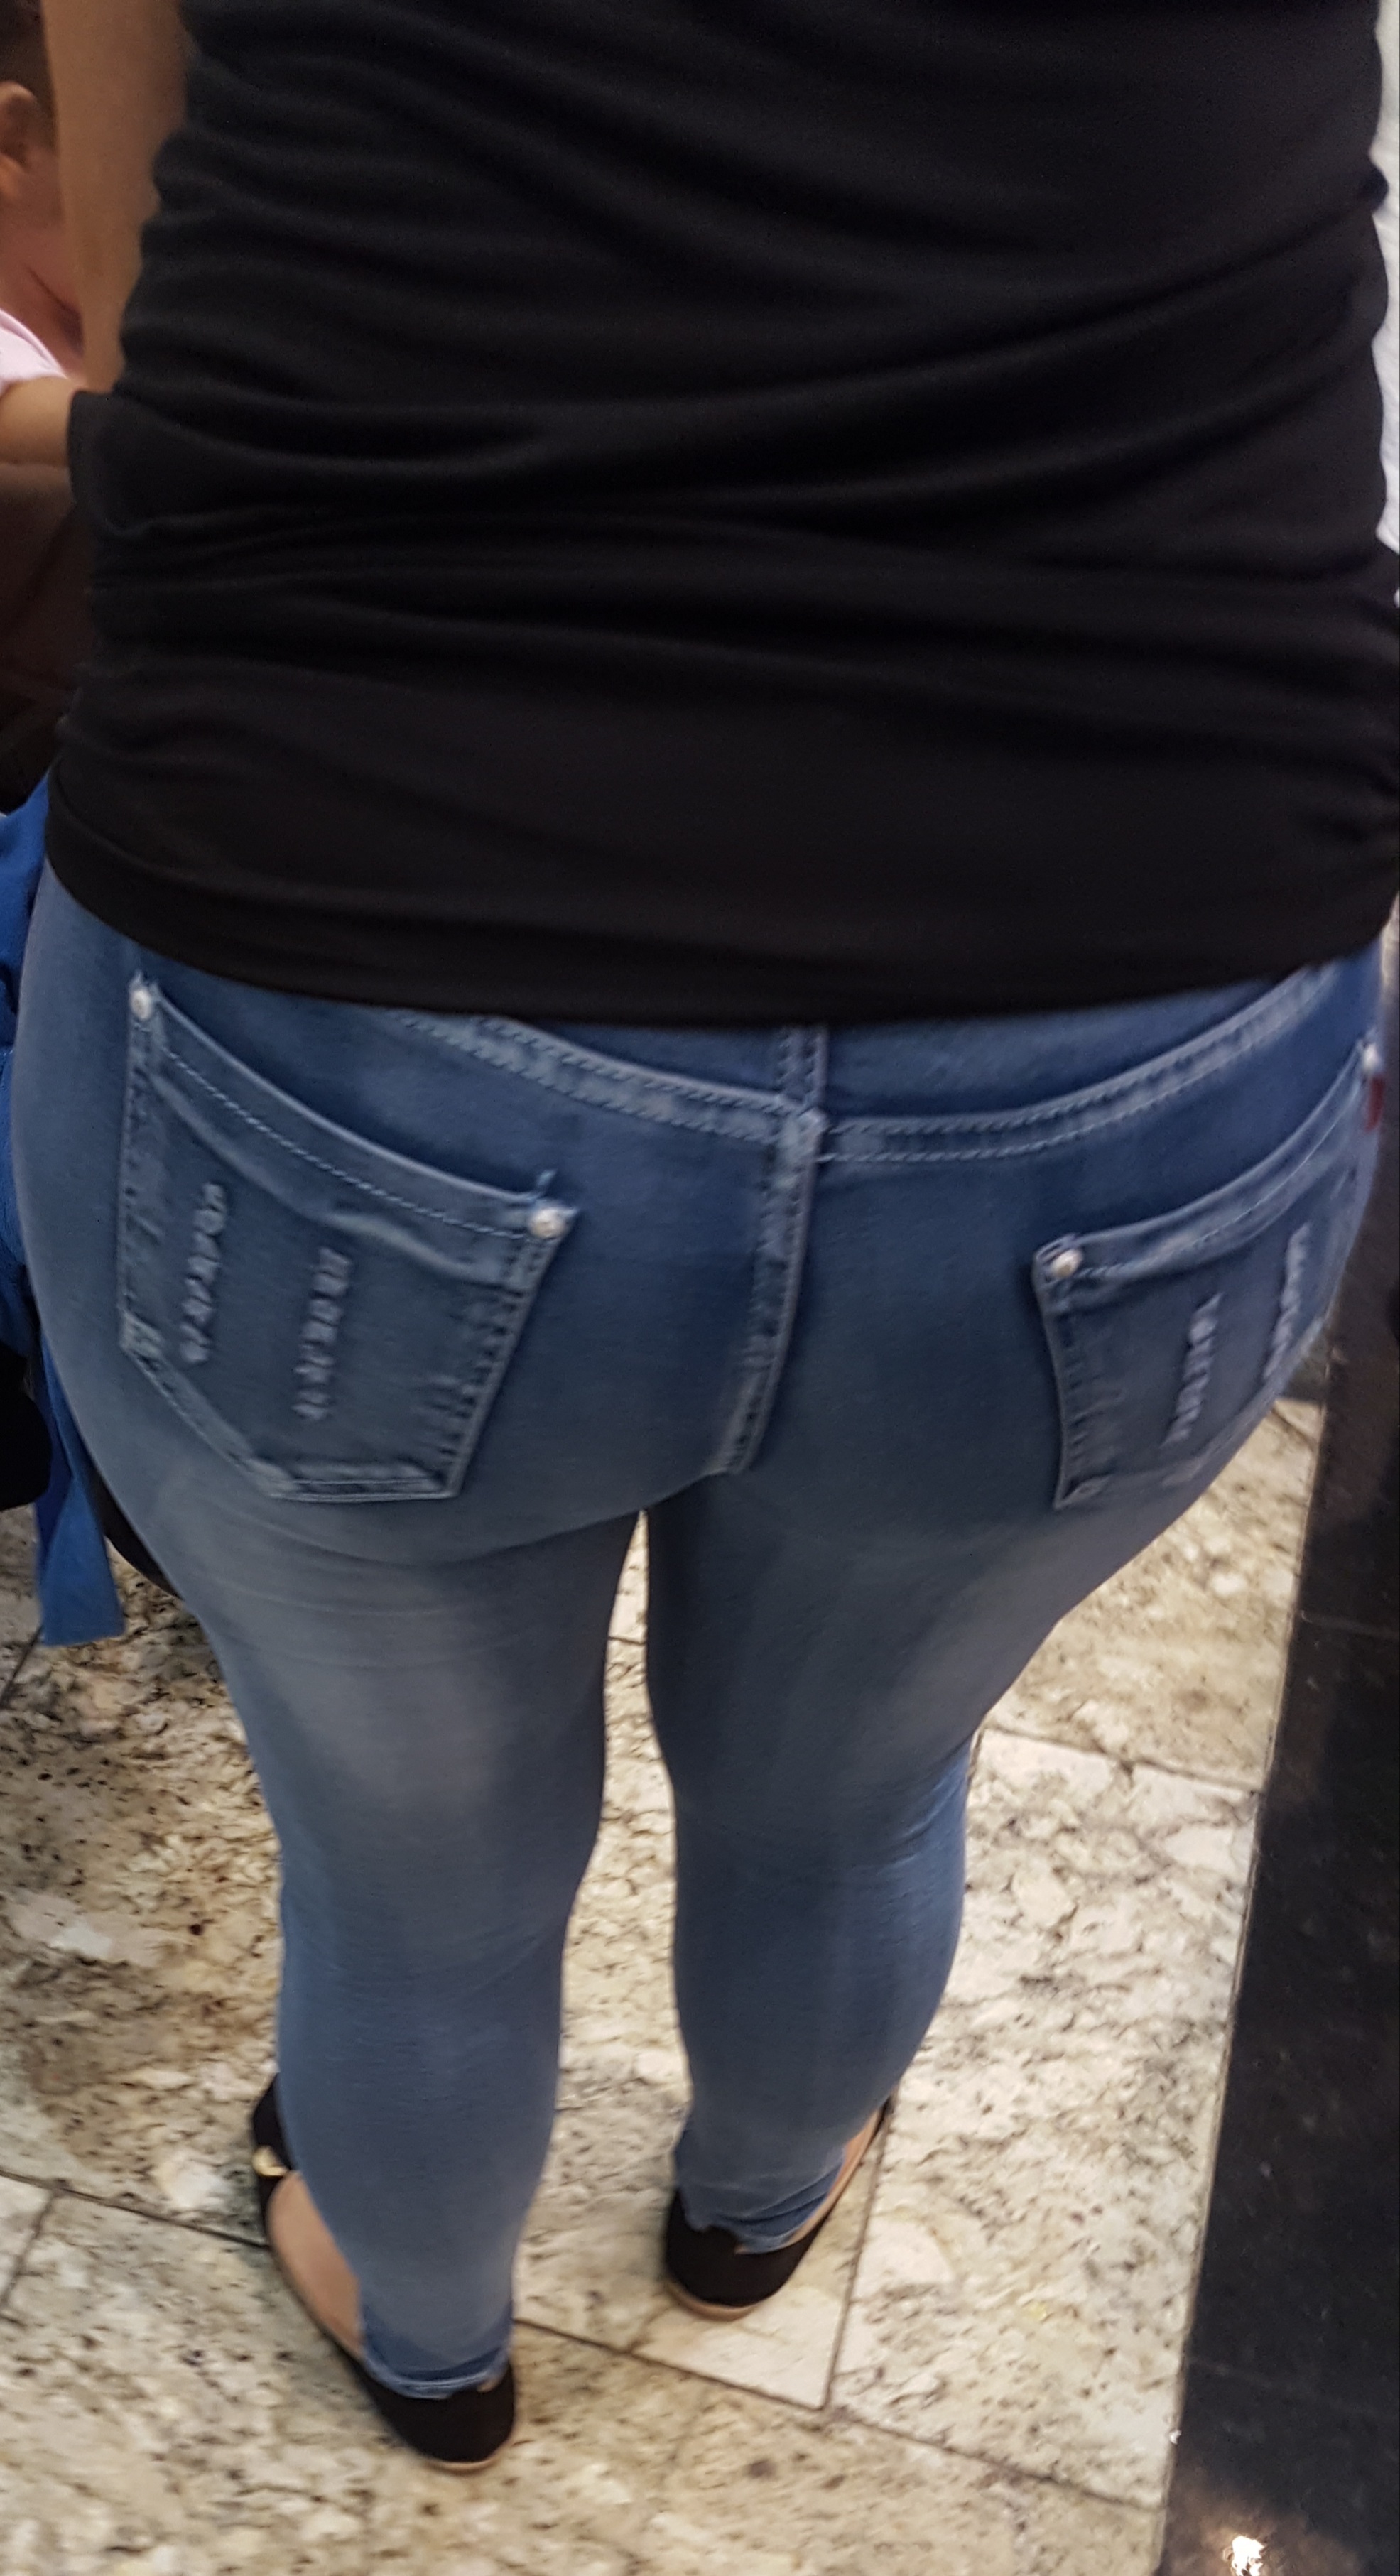 Frozen section (OC) - Tight Jeans - Forum